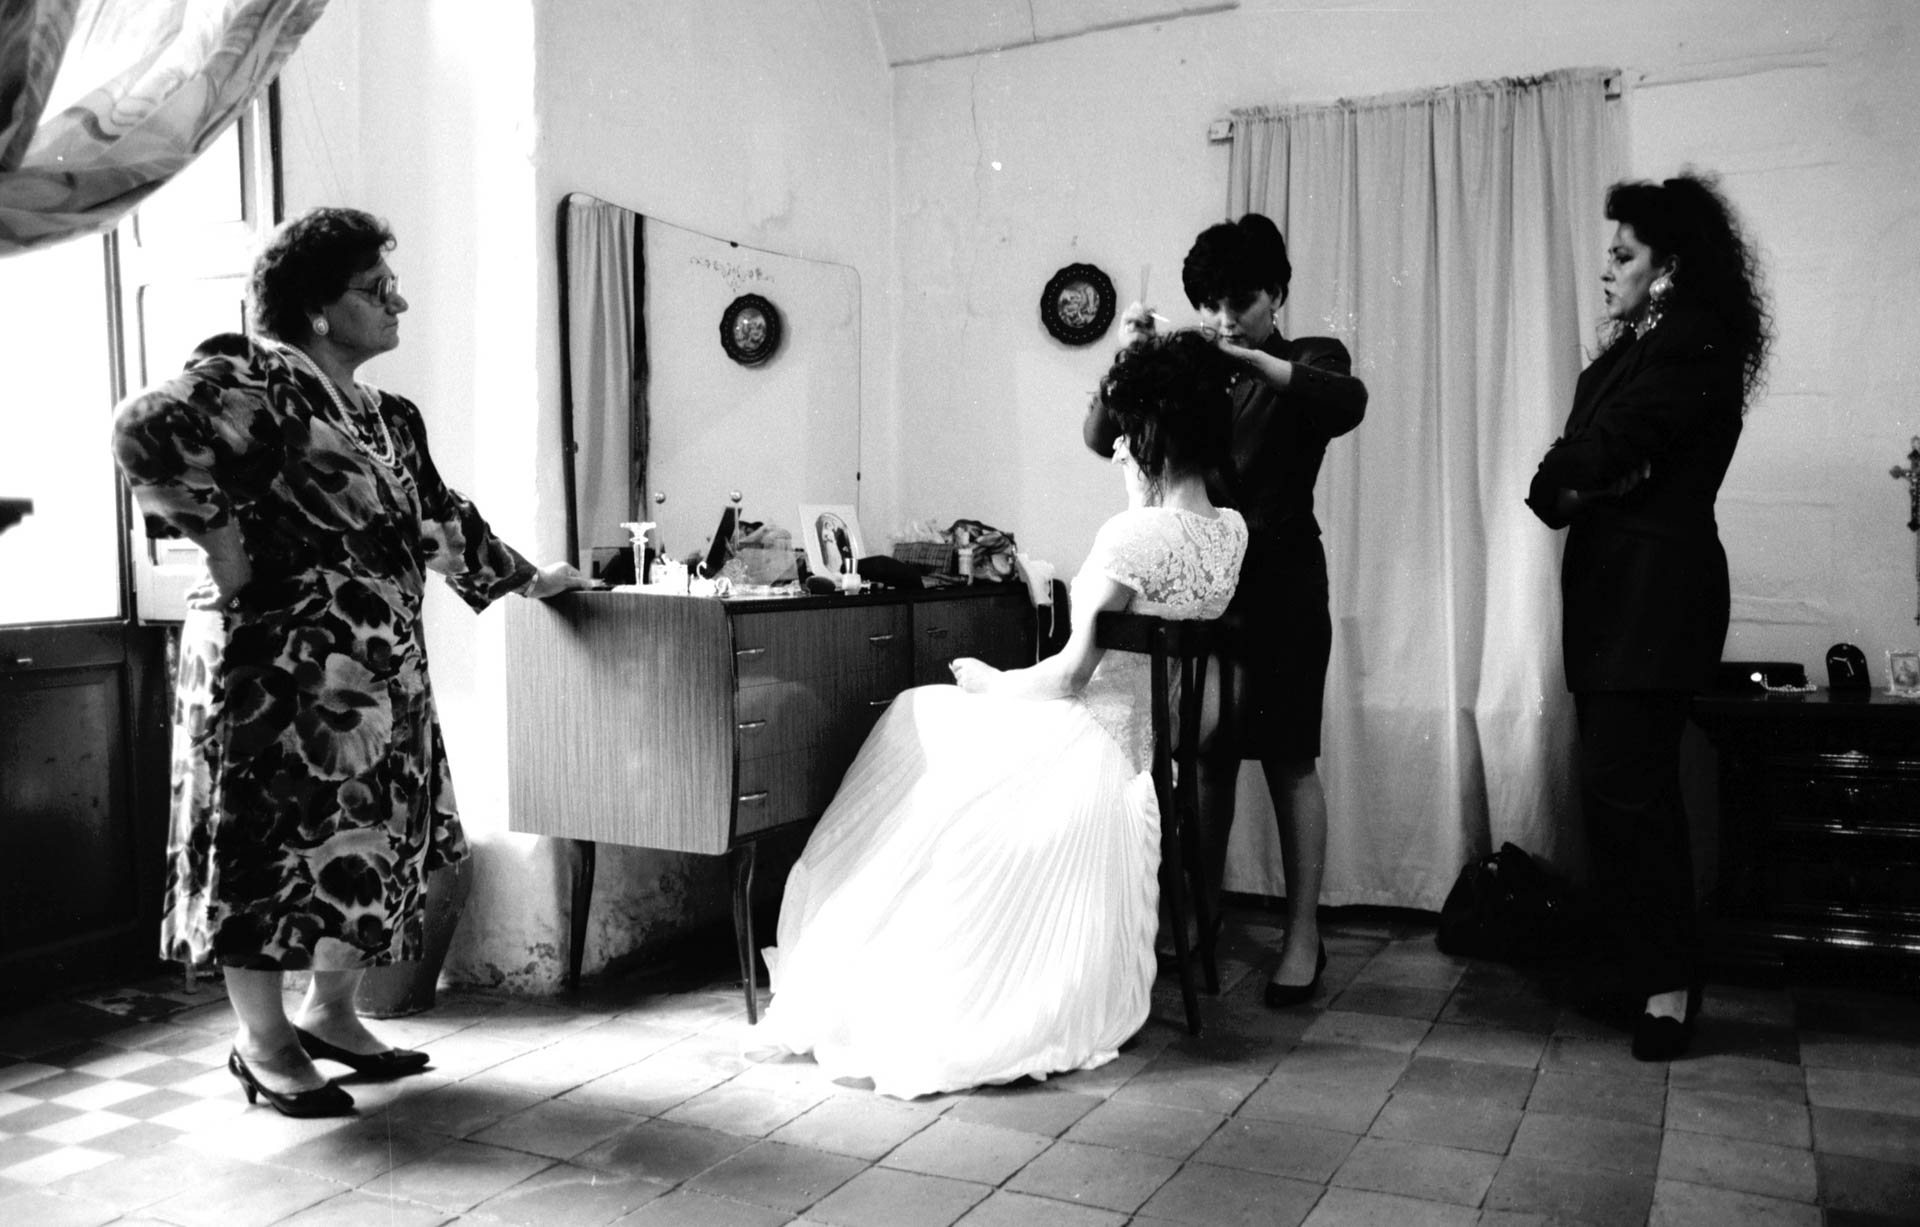  Matera, Italy - 19 October 1991 Preparation and dressing of the bride, assisted by the bride's maids.&nbsp; 